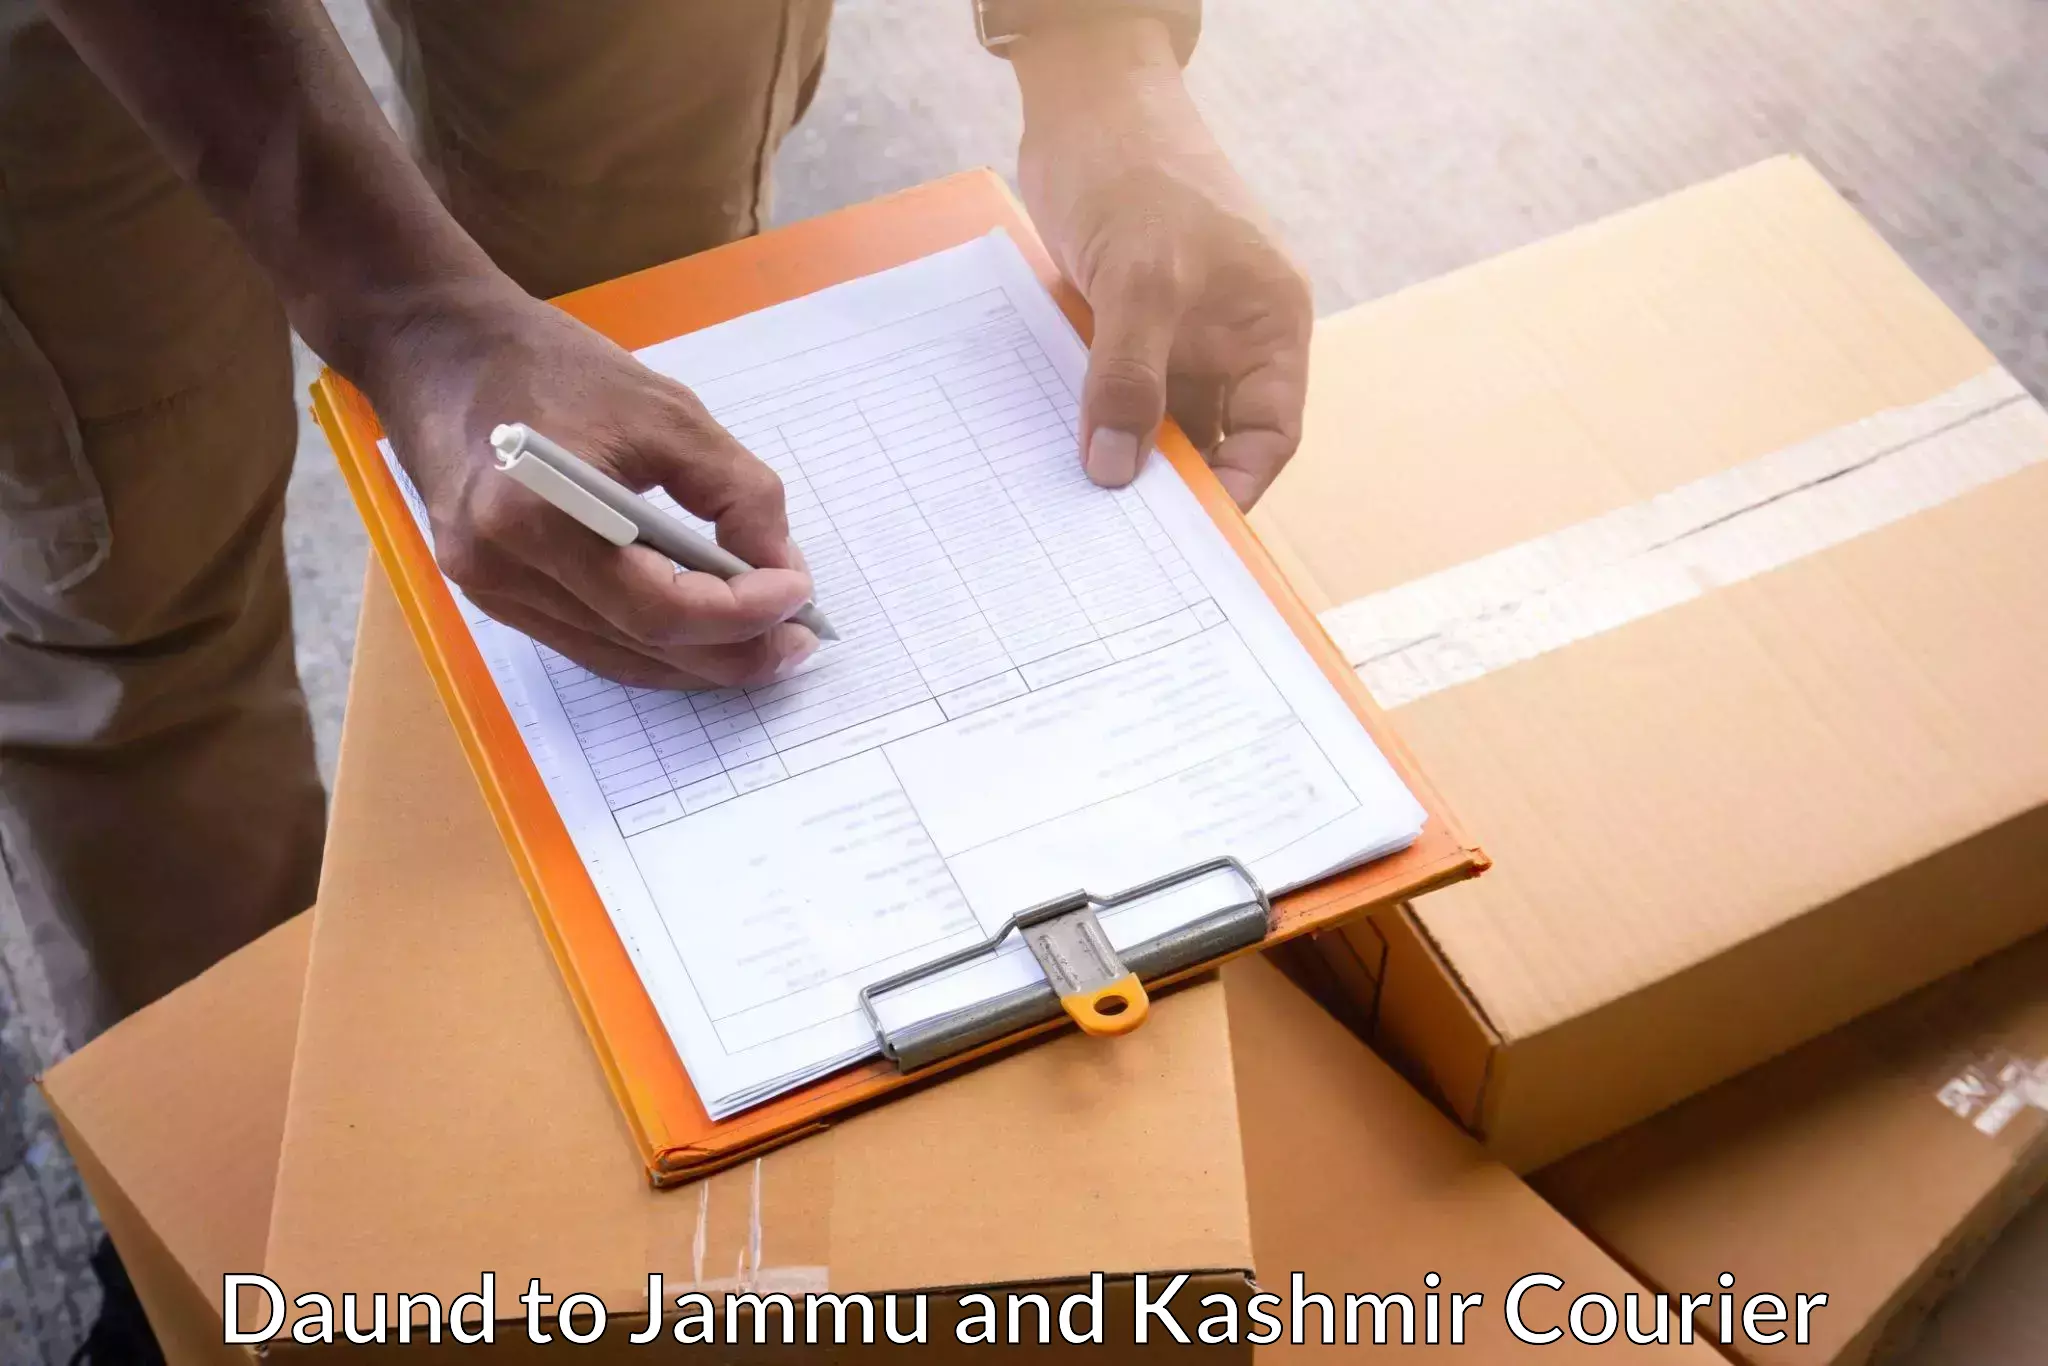 Ocean freight courier in Daund to Jammu and Kashmir